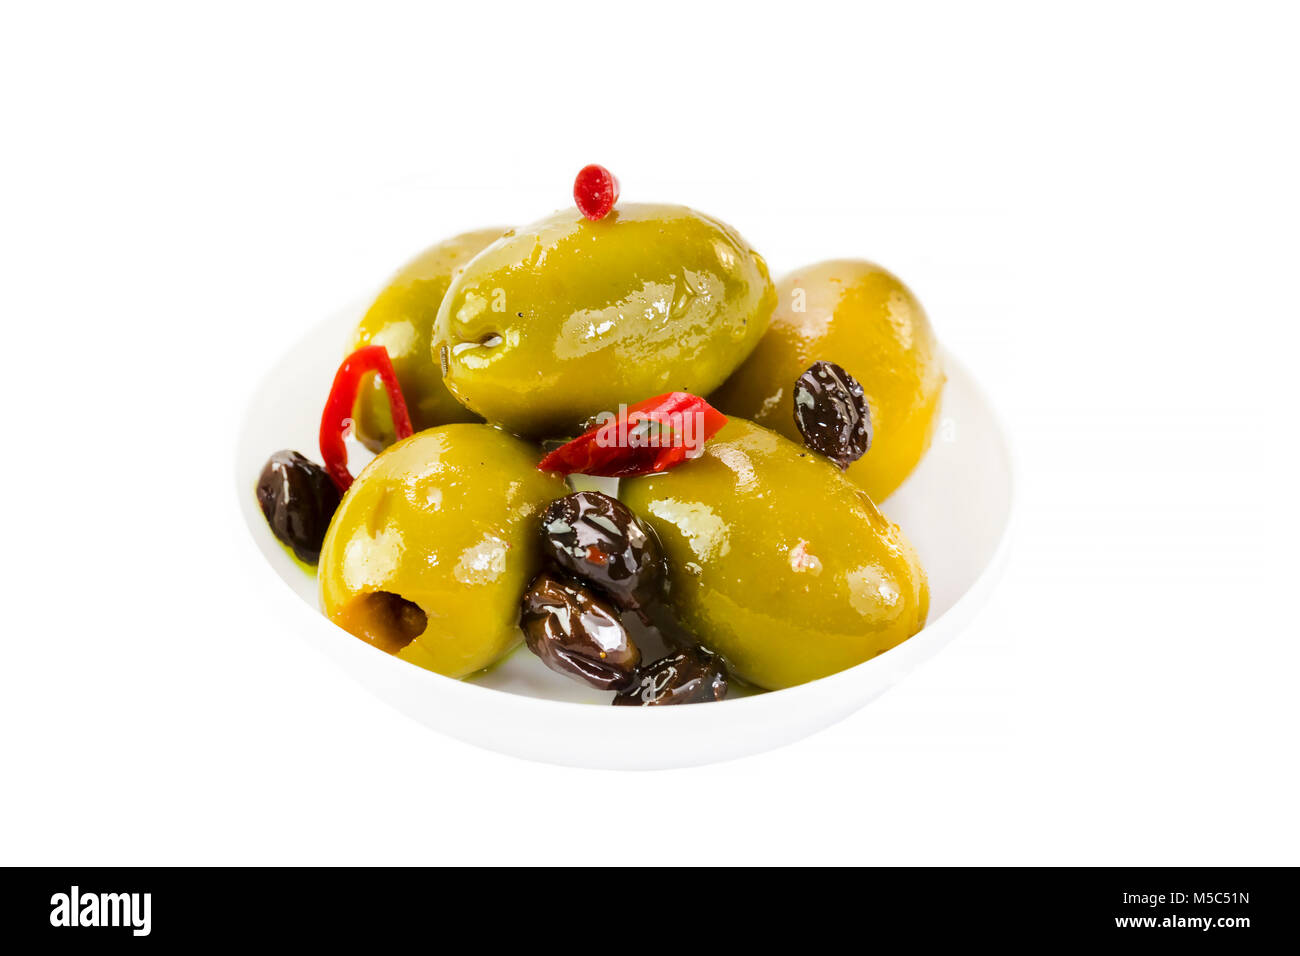 Olives in a small plastic plate on a white background. Stock Photo